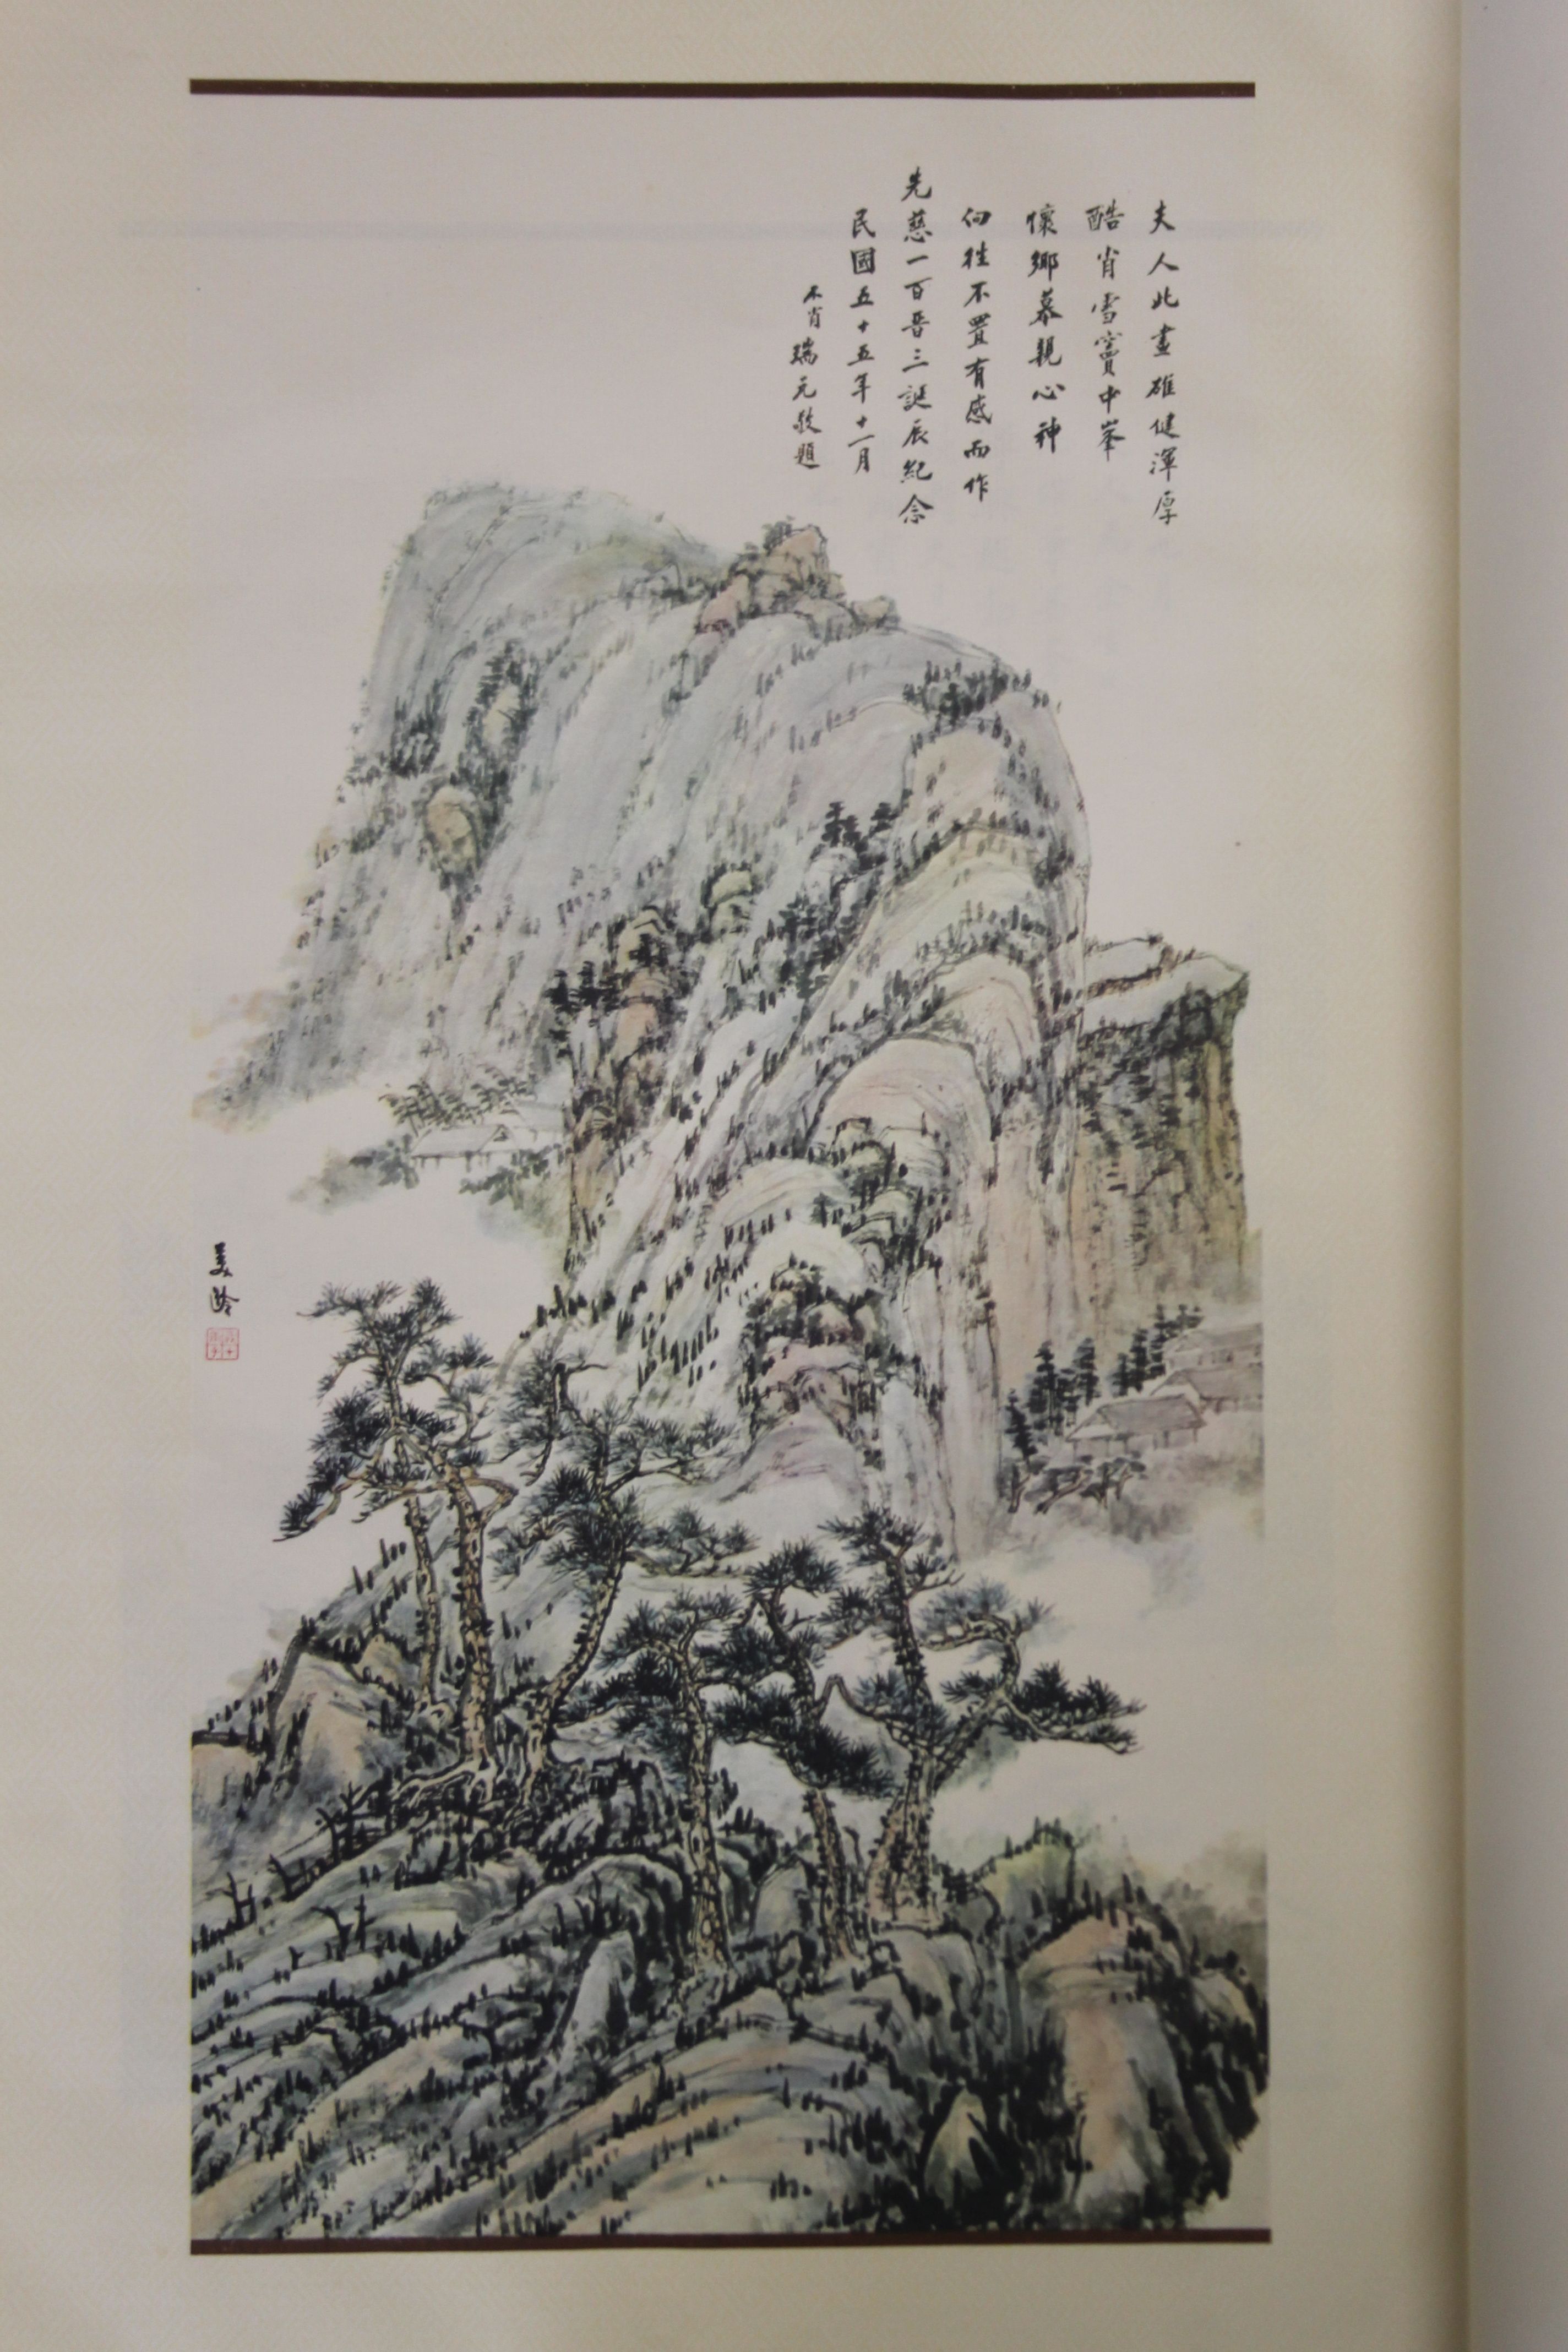 Kai-Shek (Madame Chiang), Landscapes, Orchid, Bamboo and Flower Paintings by Madame Chaing Kai-Shek, - Image 7 of 9